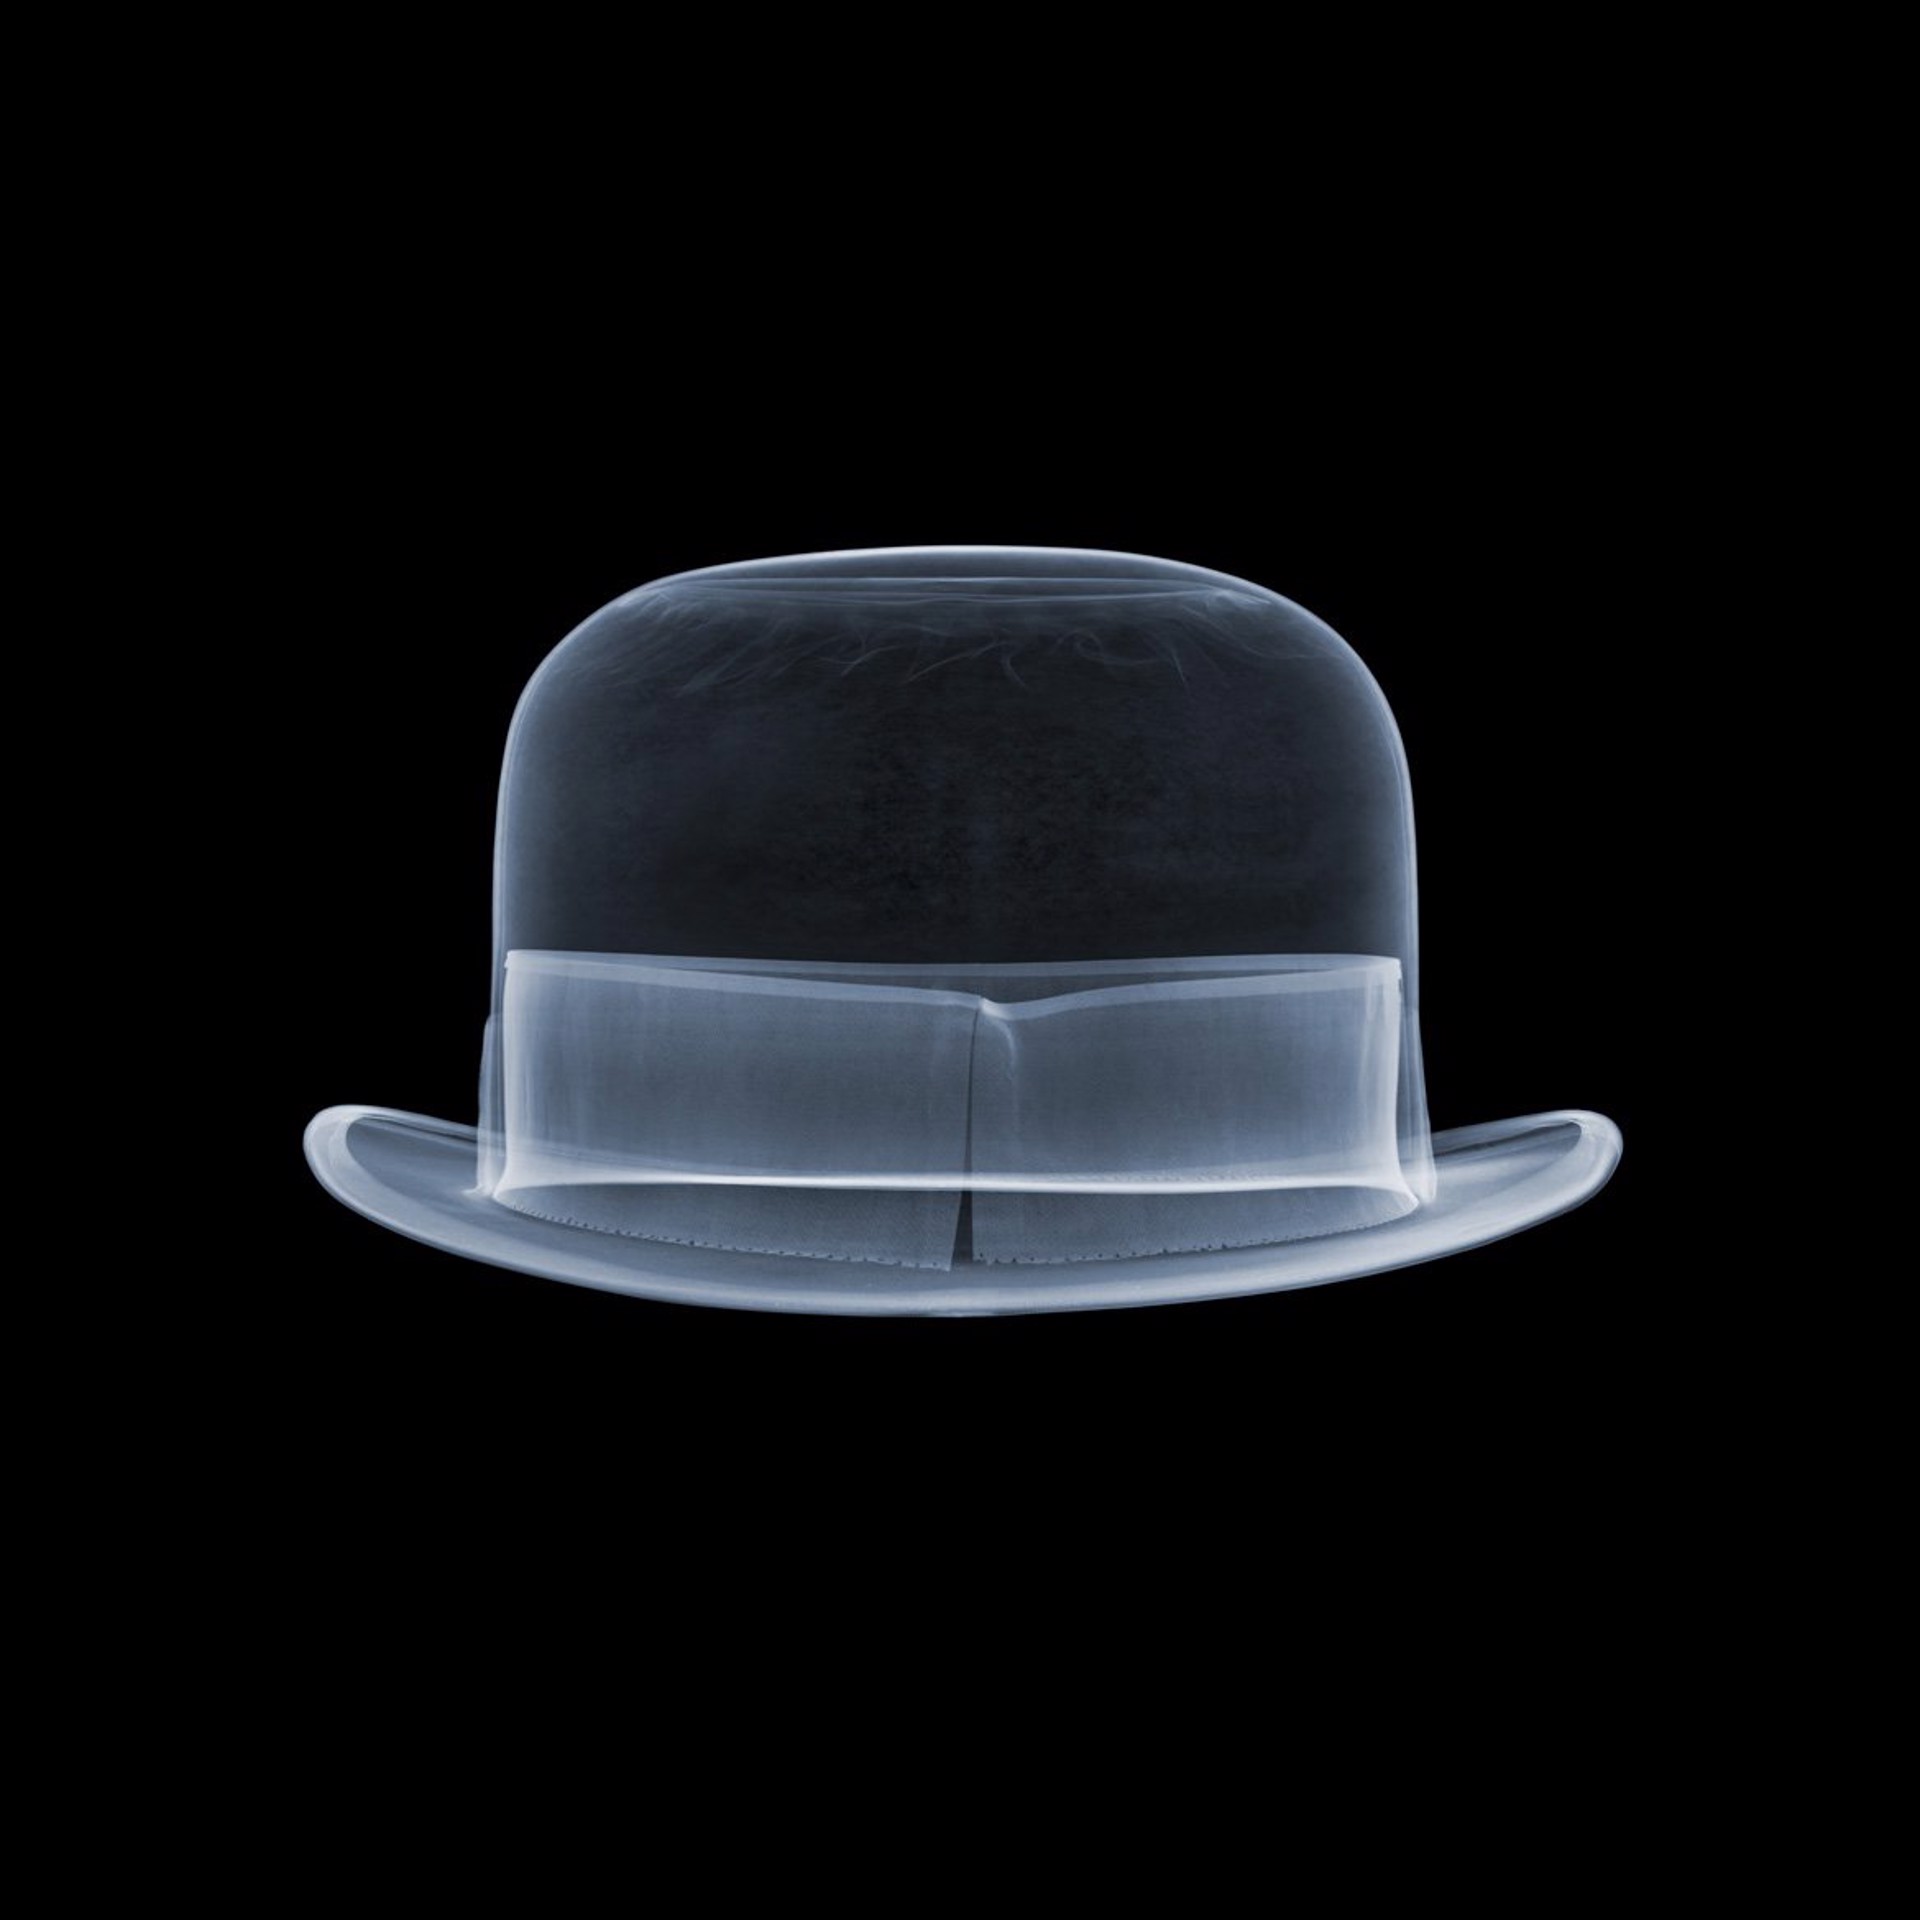 City Bowler by Nick Veasey